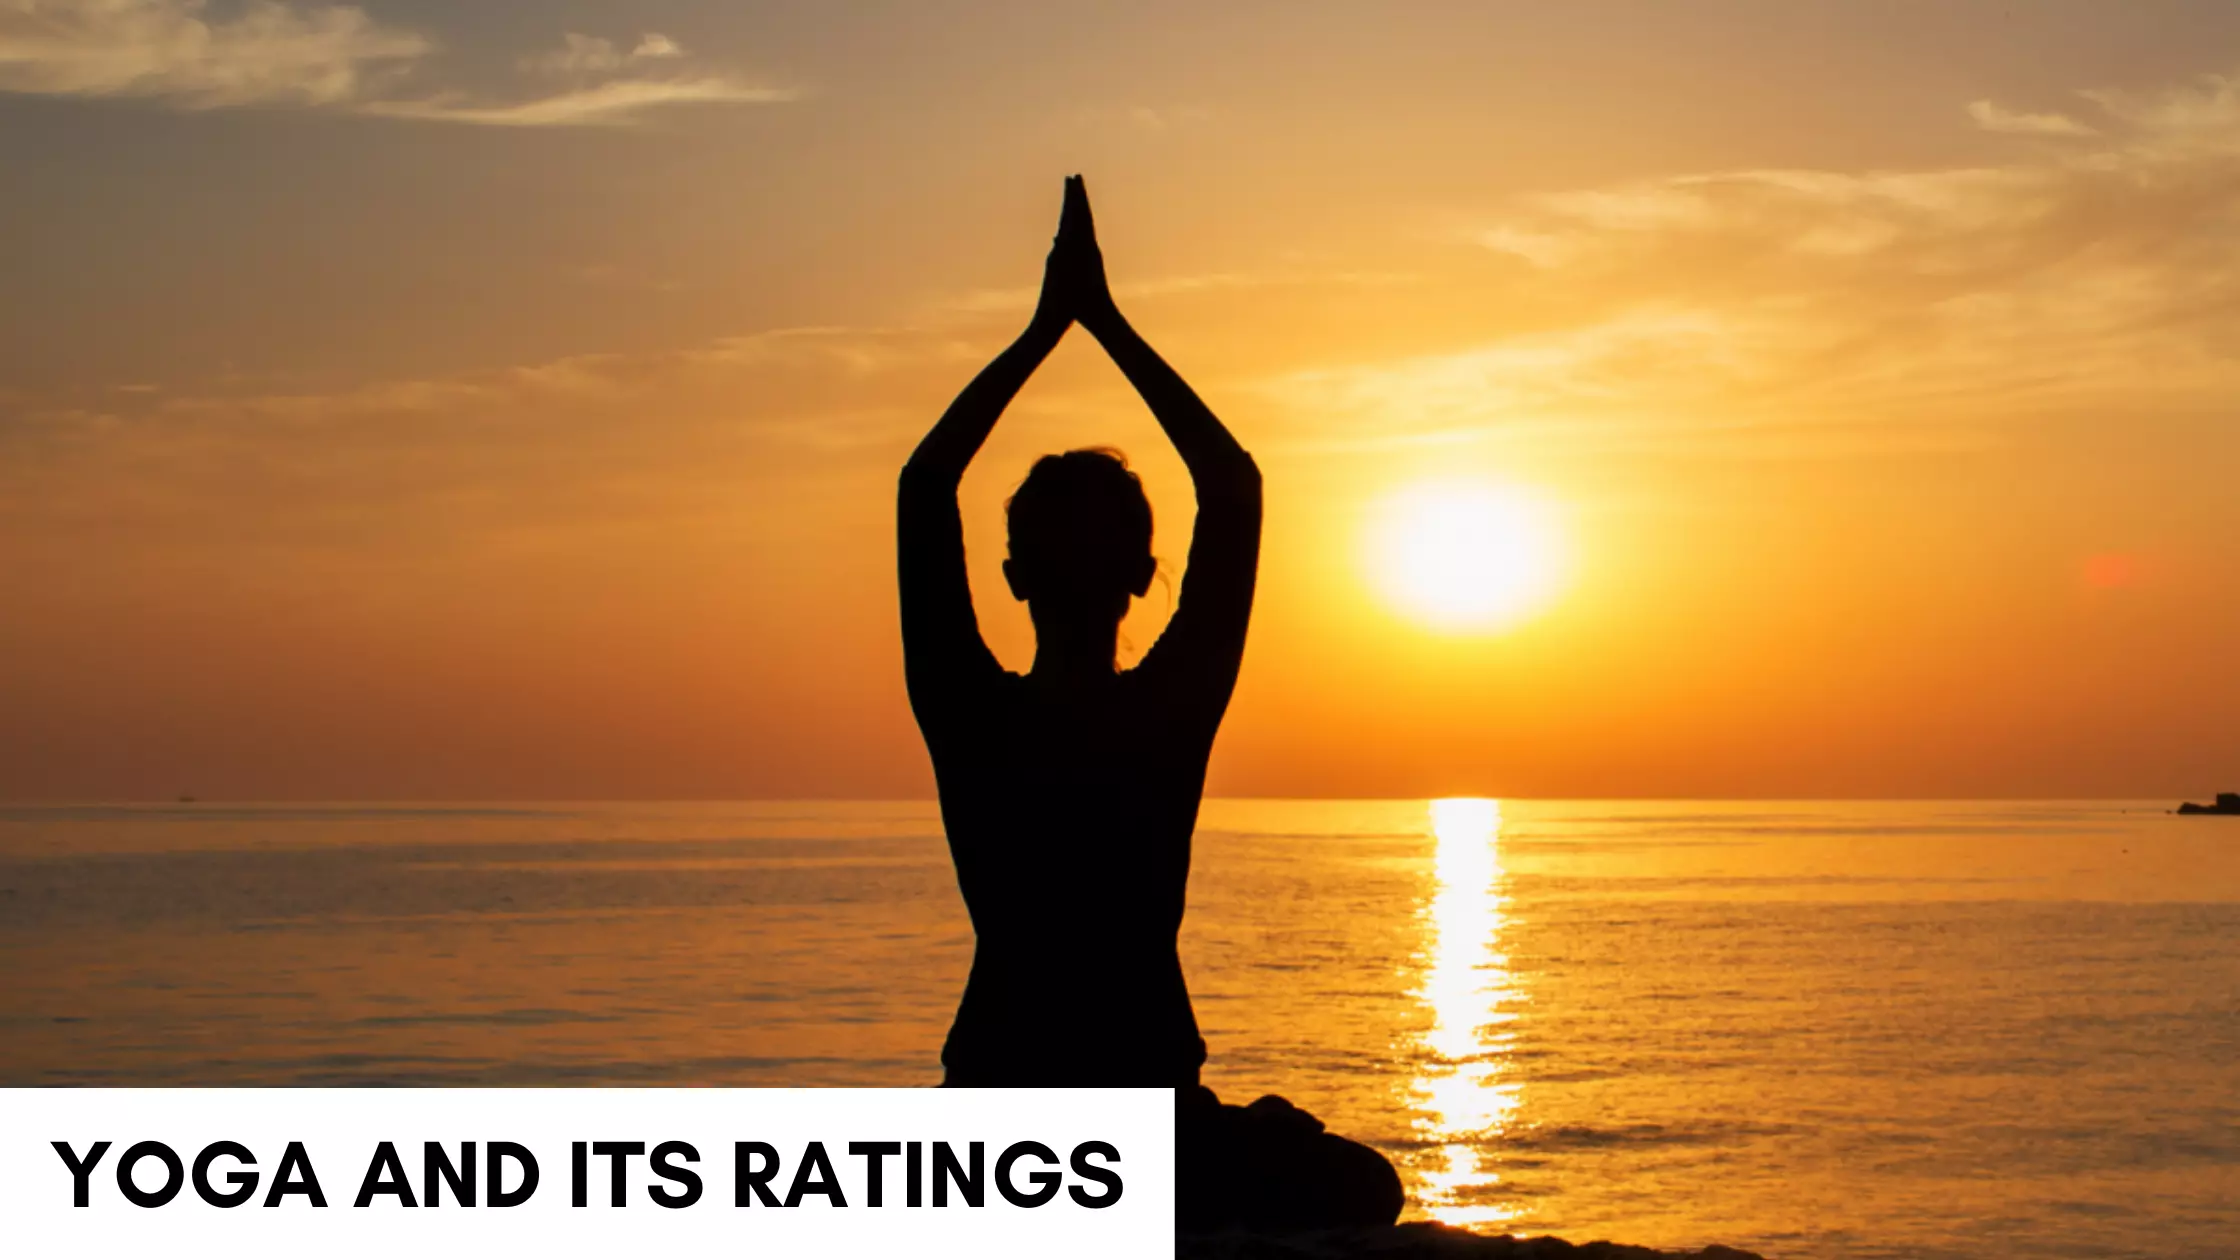 YOGA AND ITS RATINGS